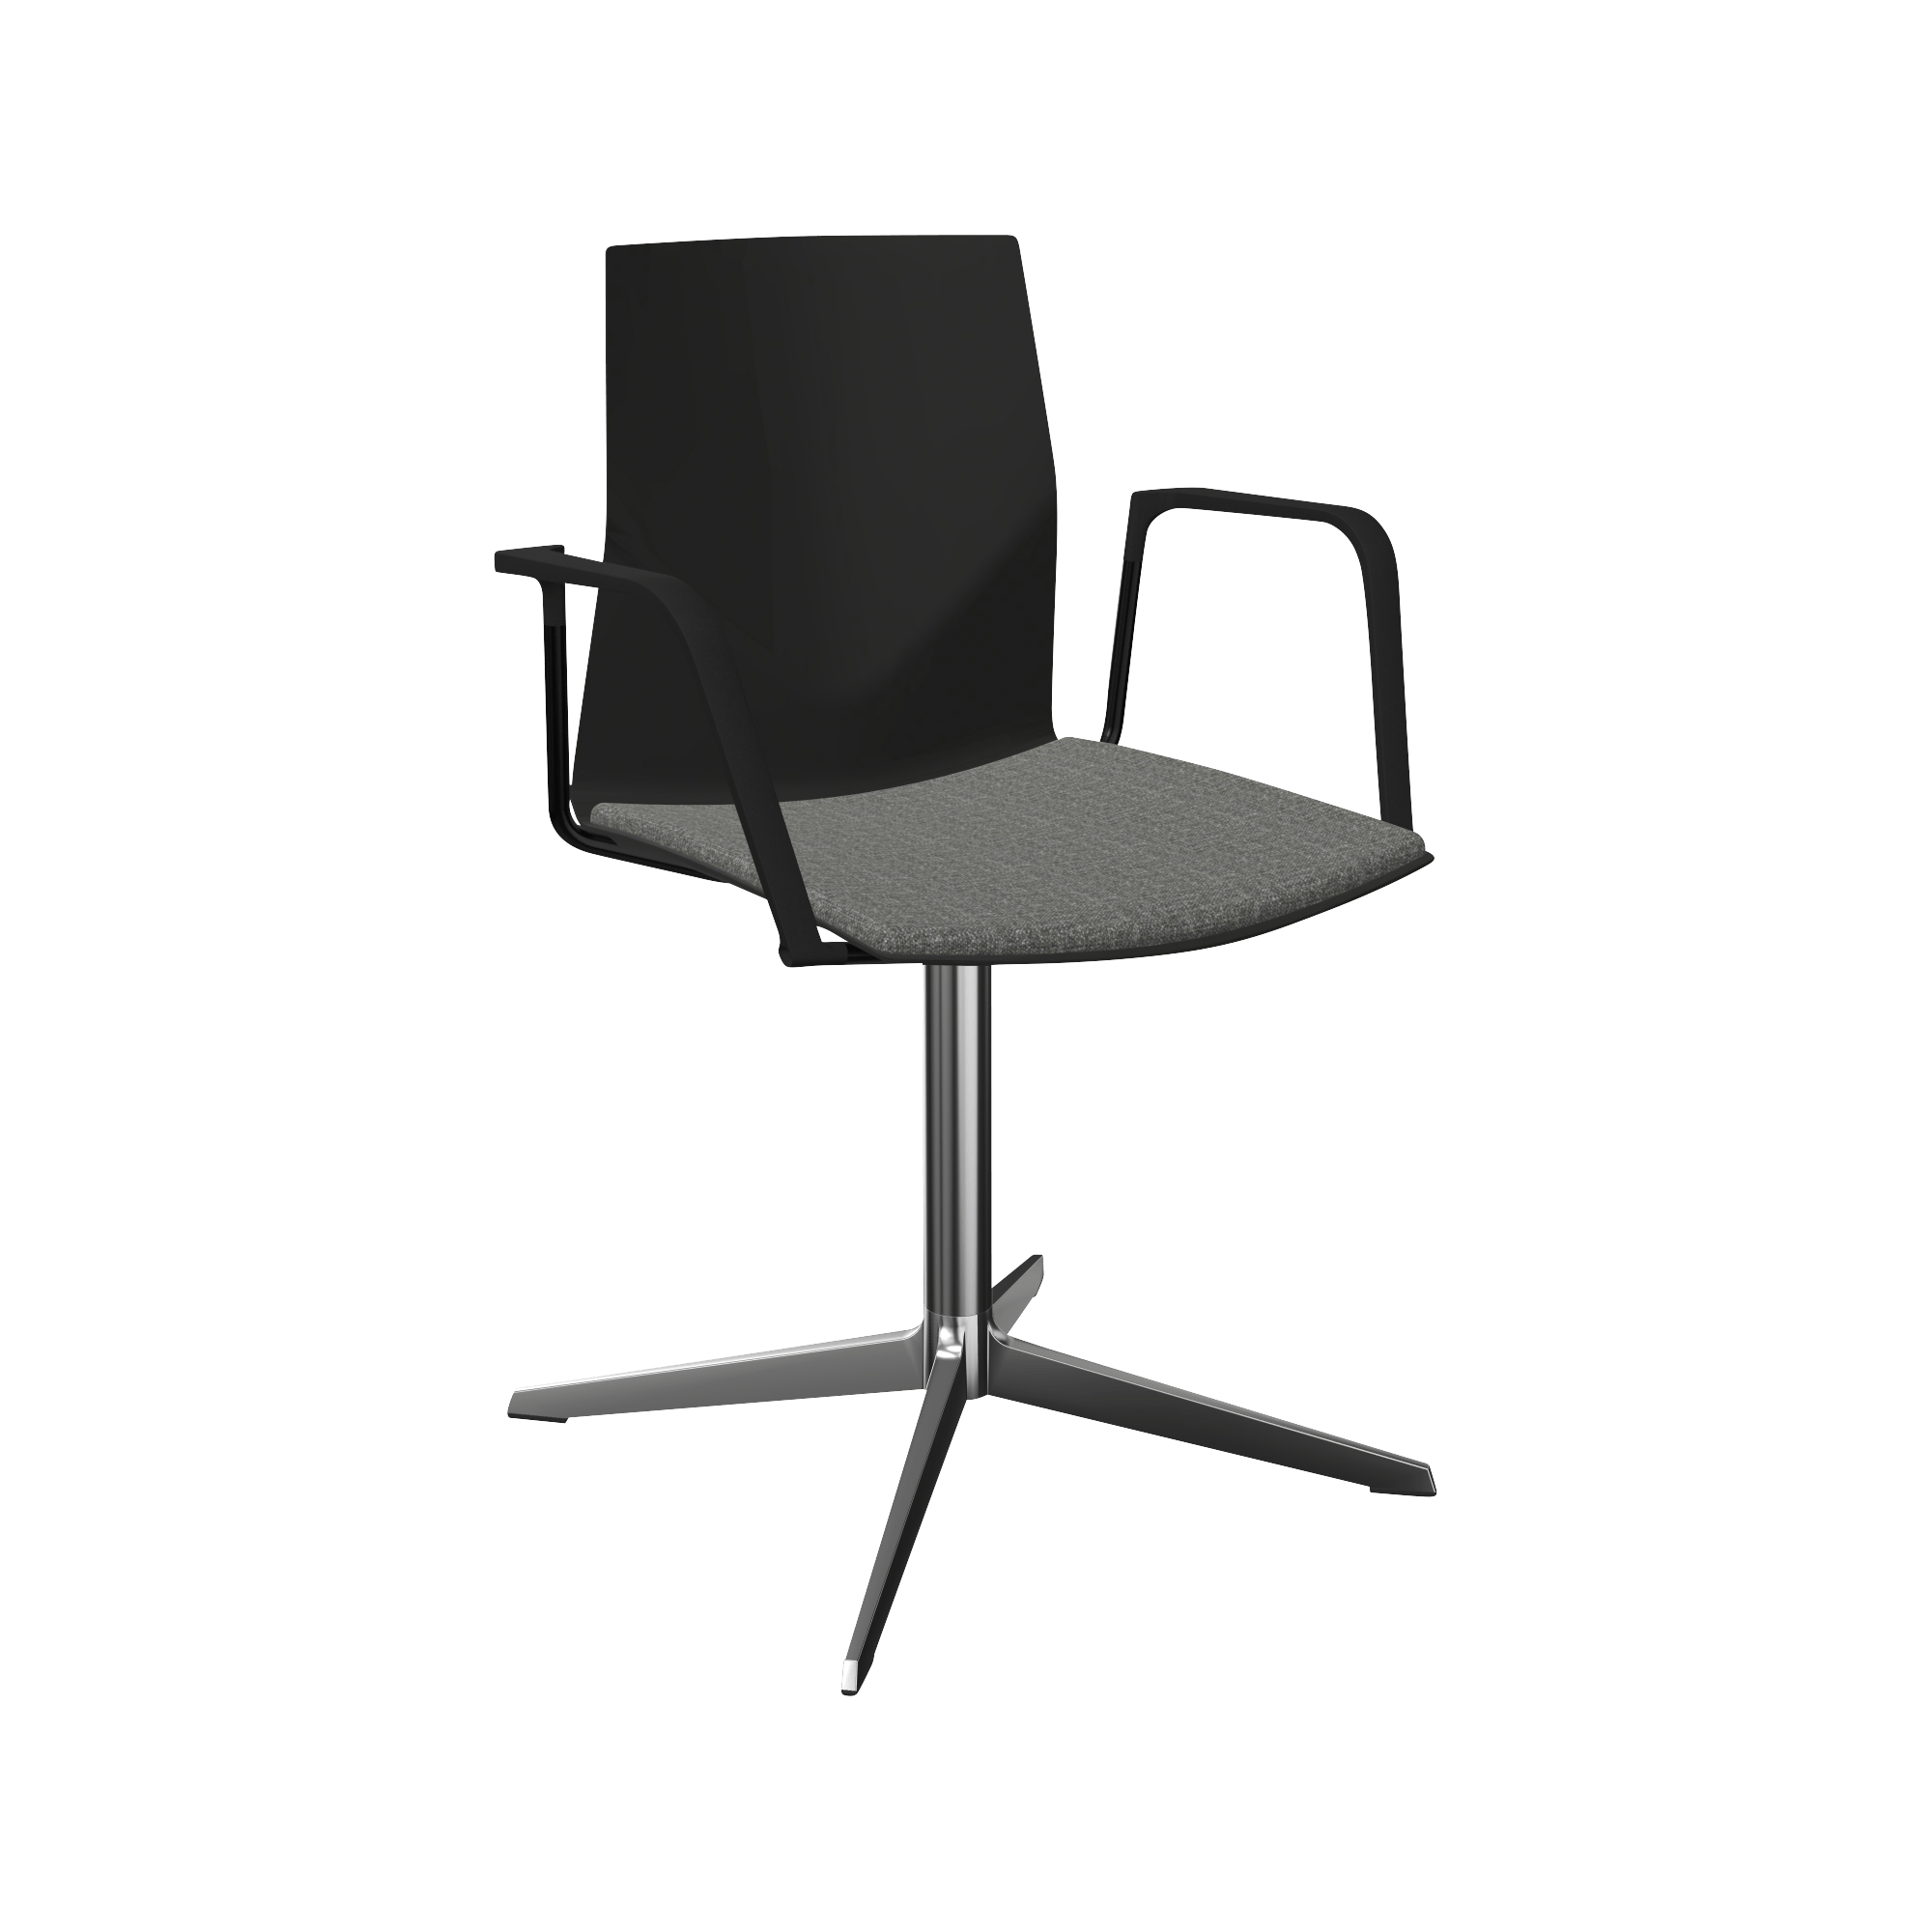 A black office chair with a grey seat and black arm rests and a chrome pedestal leg